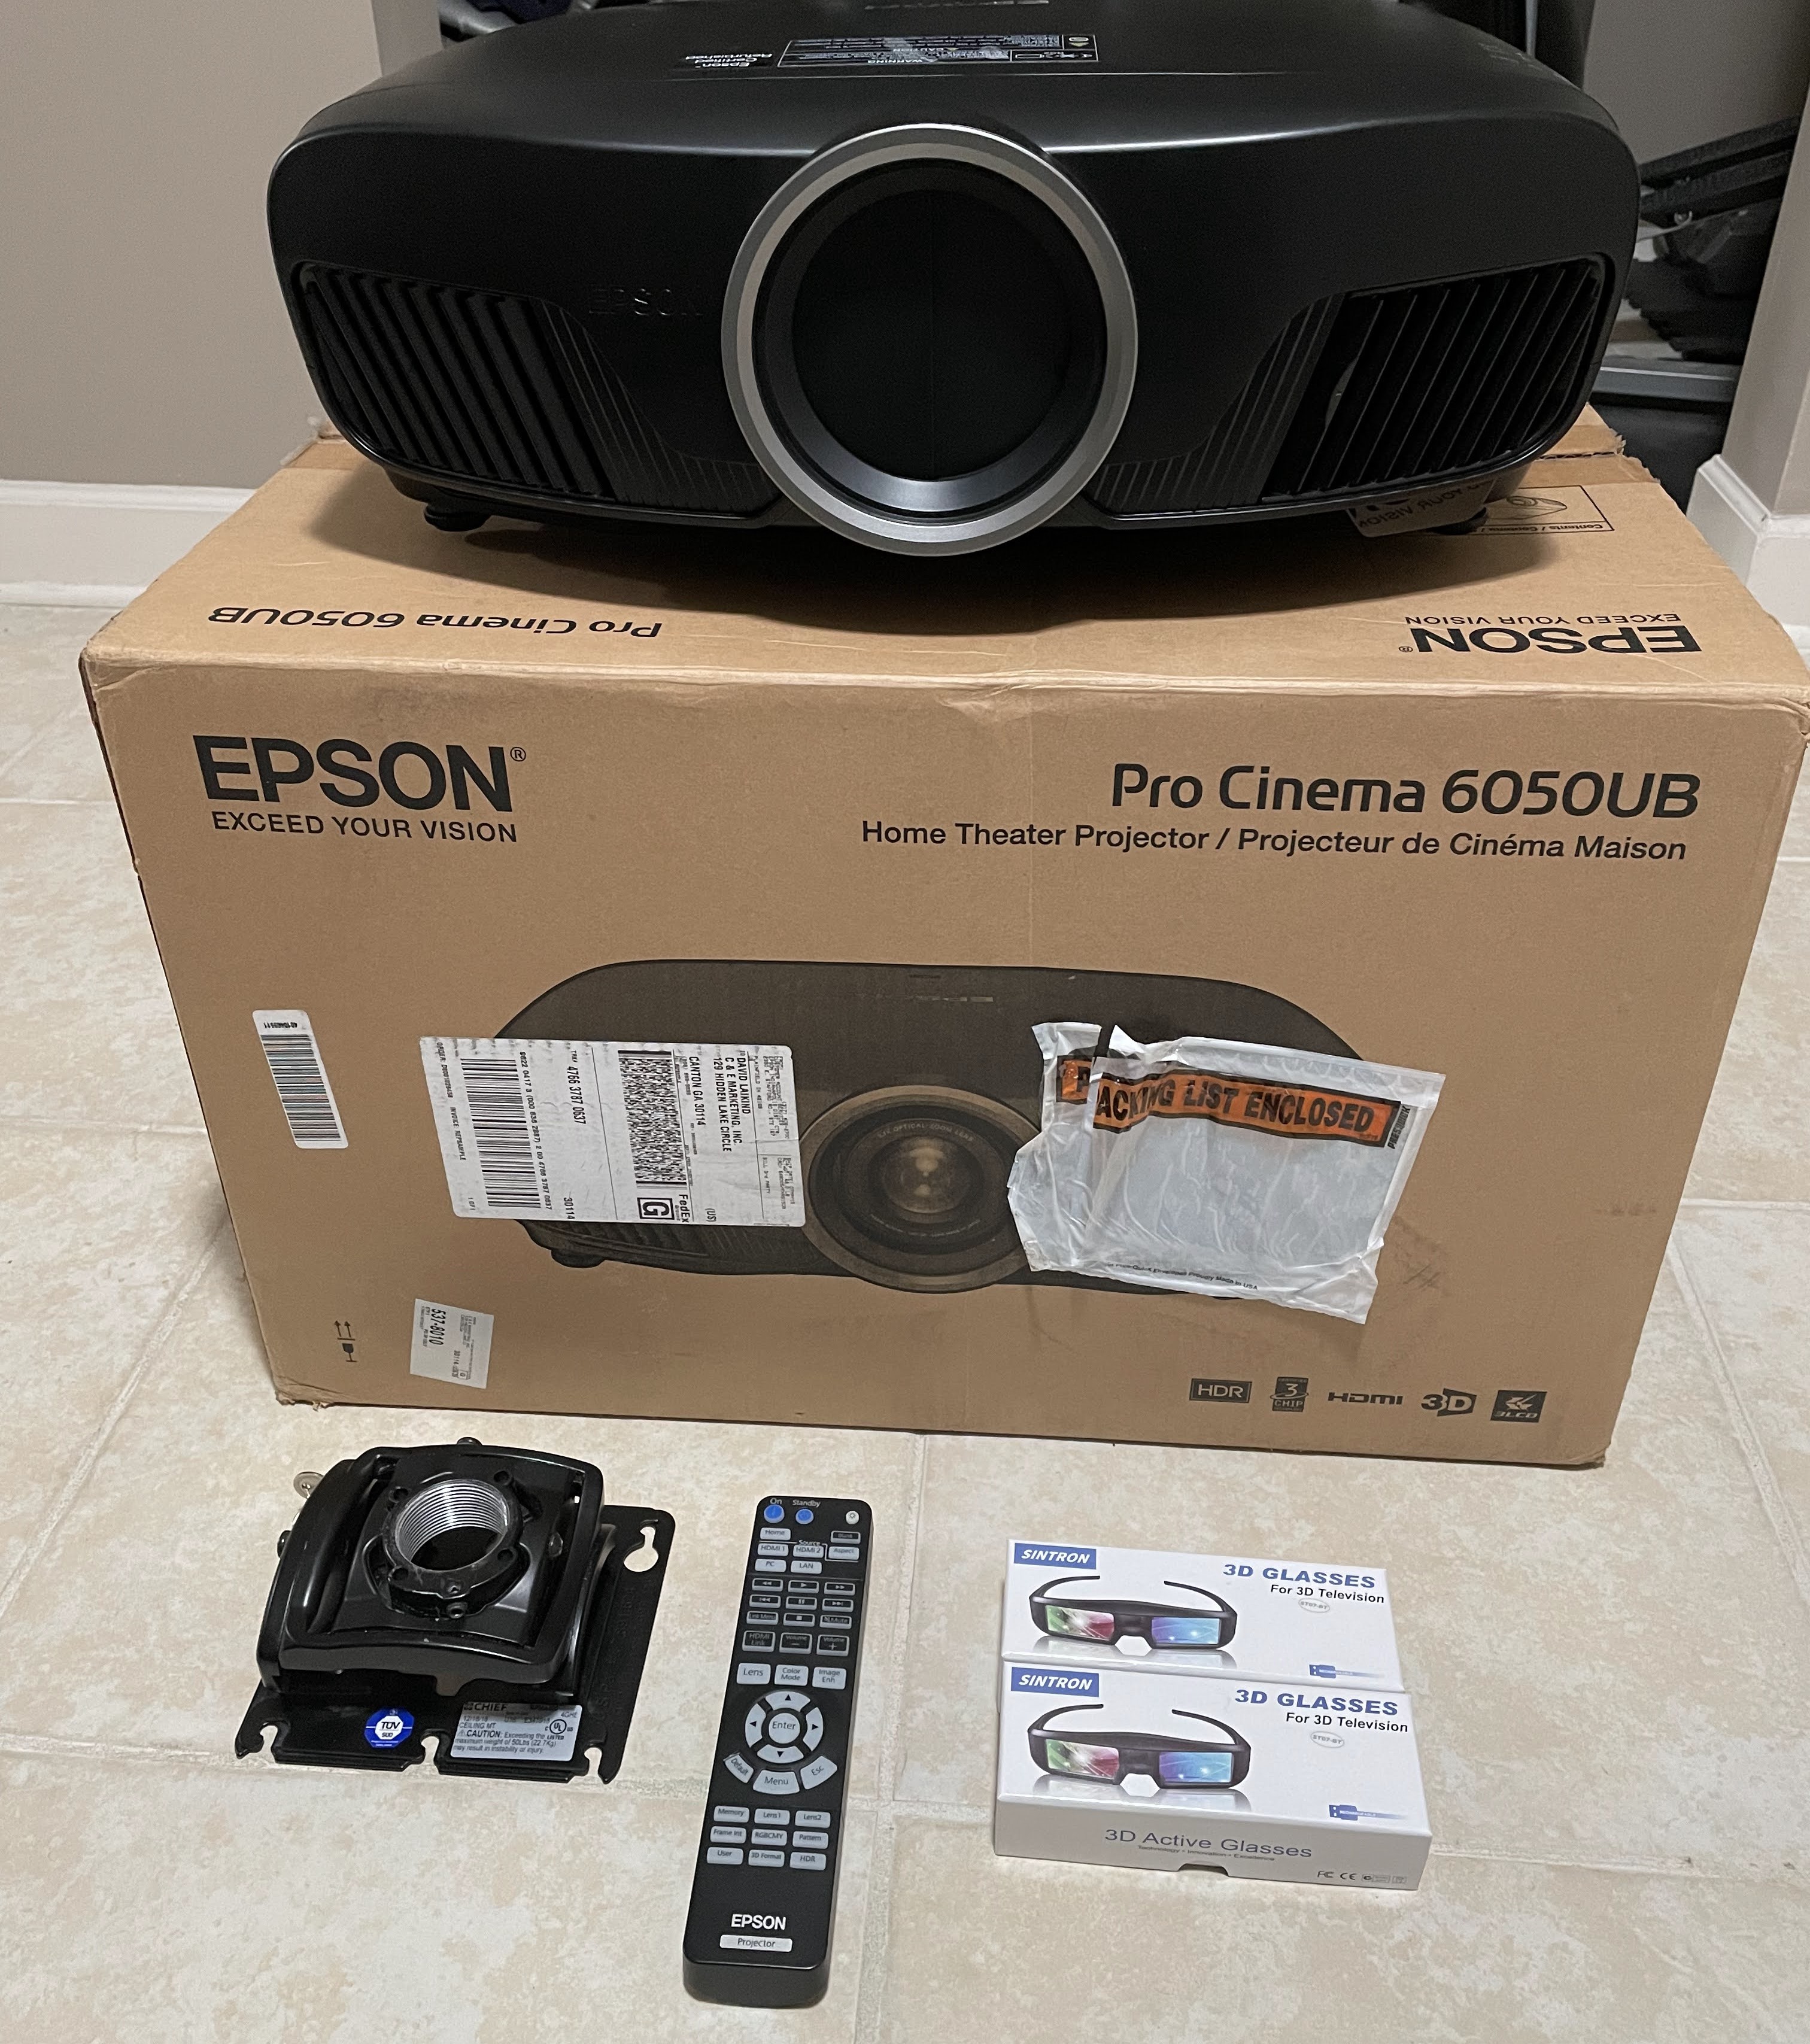 SOLD For Sale: Epson Pro Cinema 6050 UB - $2100.00 SOLD*** | Home Theater  Forum